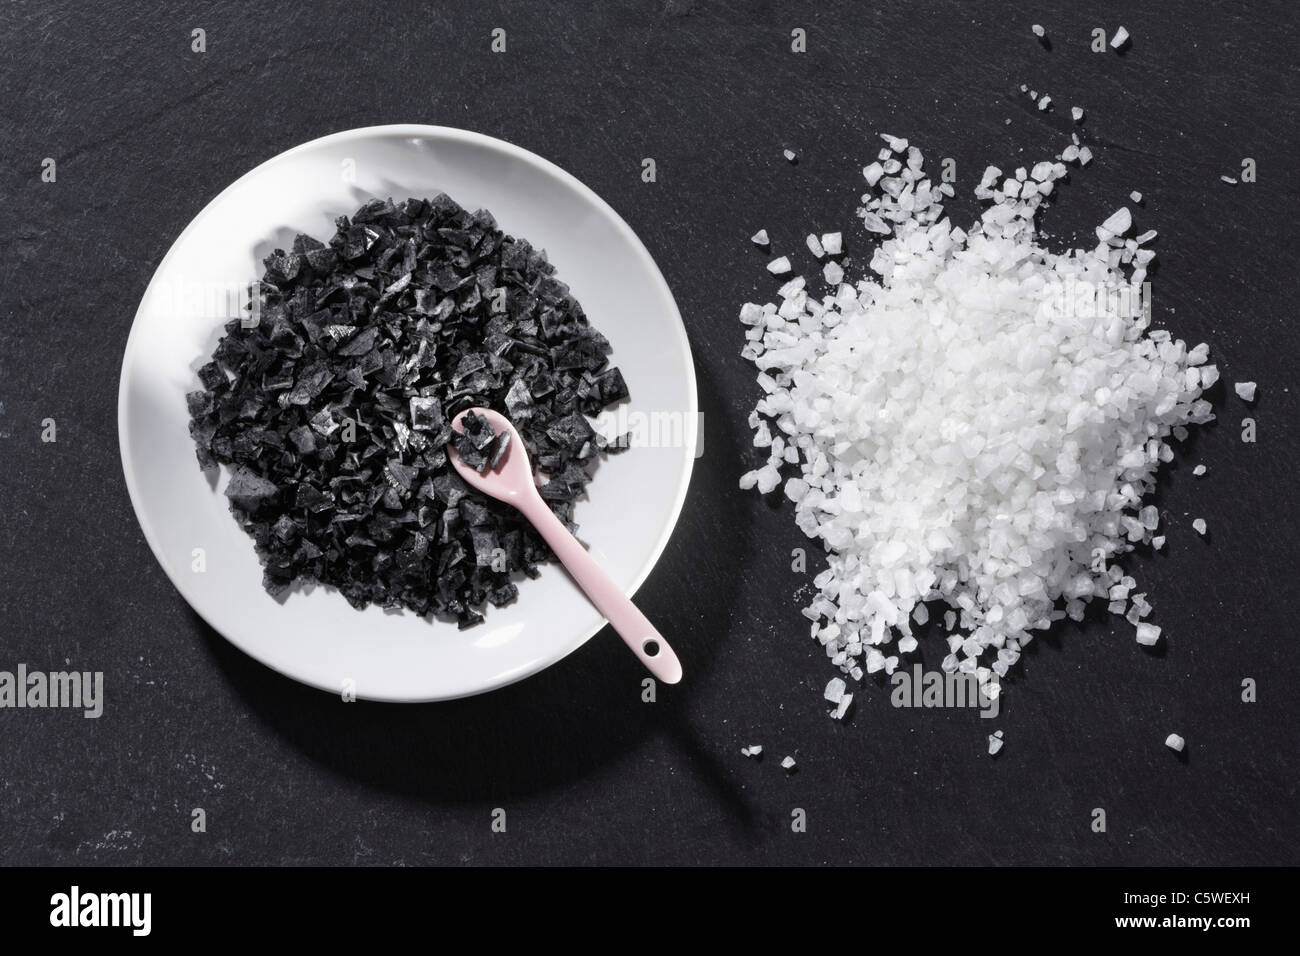 Black and white salt, elevated view Stock Photo